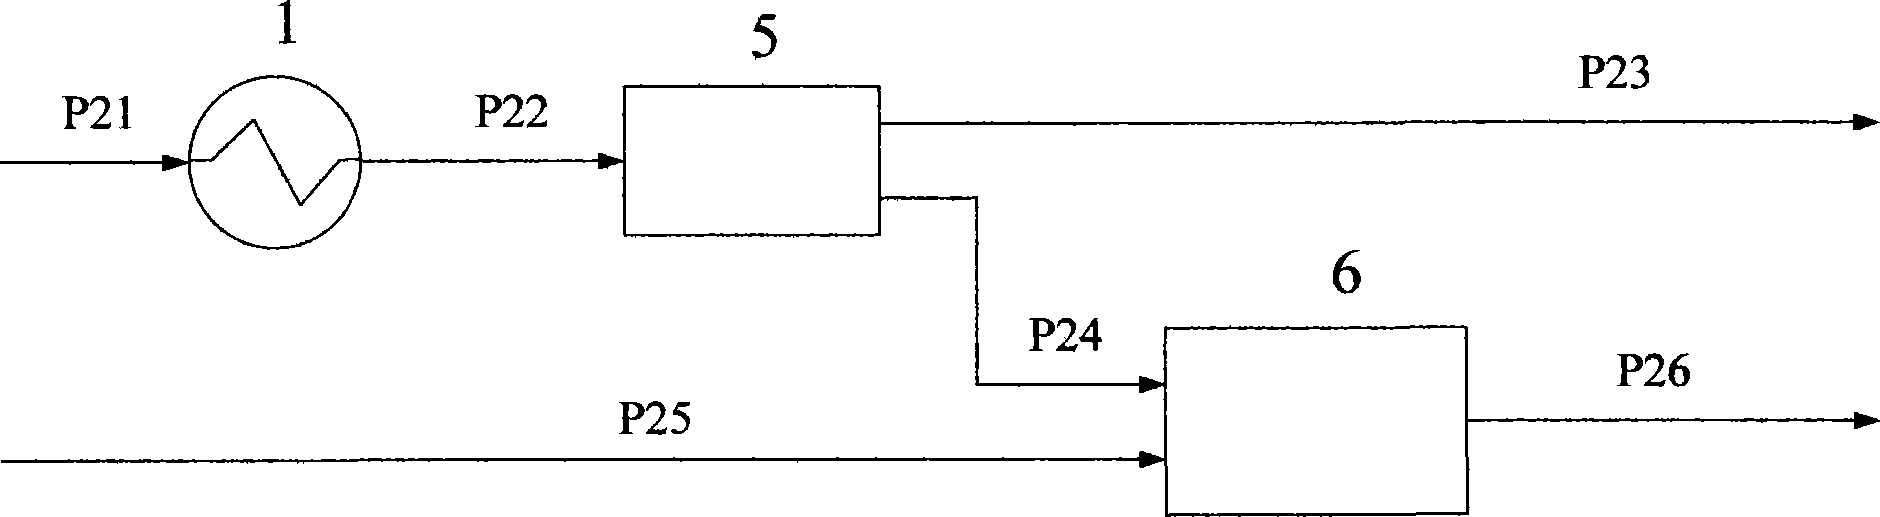 Method and apparatus for producing hydrogen from hydrogen-containing synthesis gas using palladium membrane